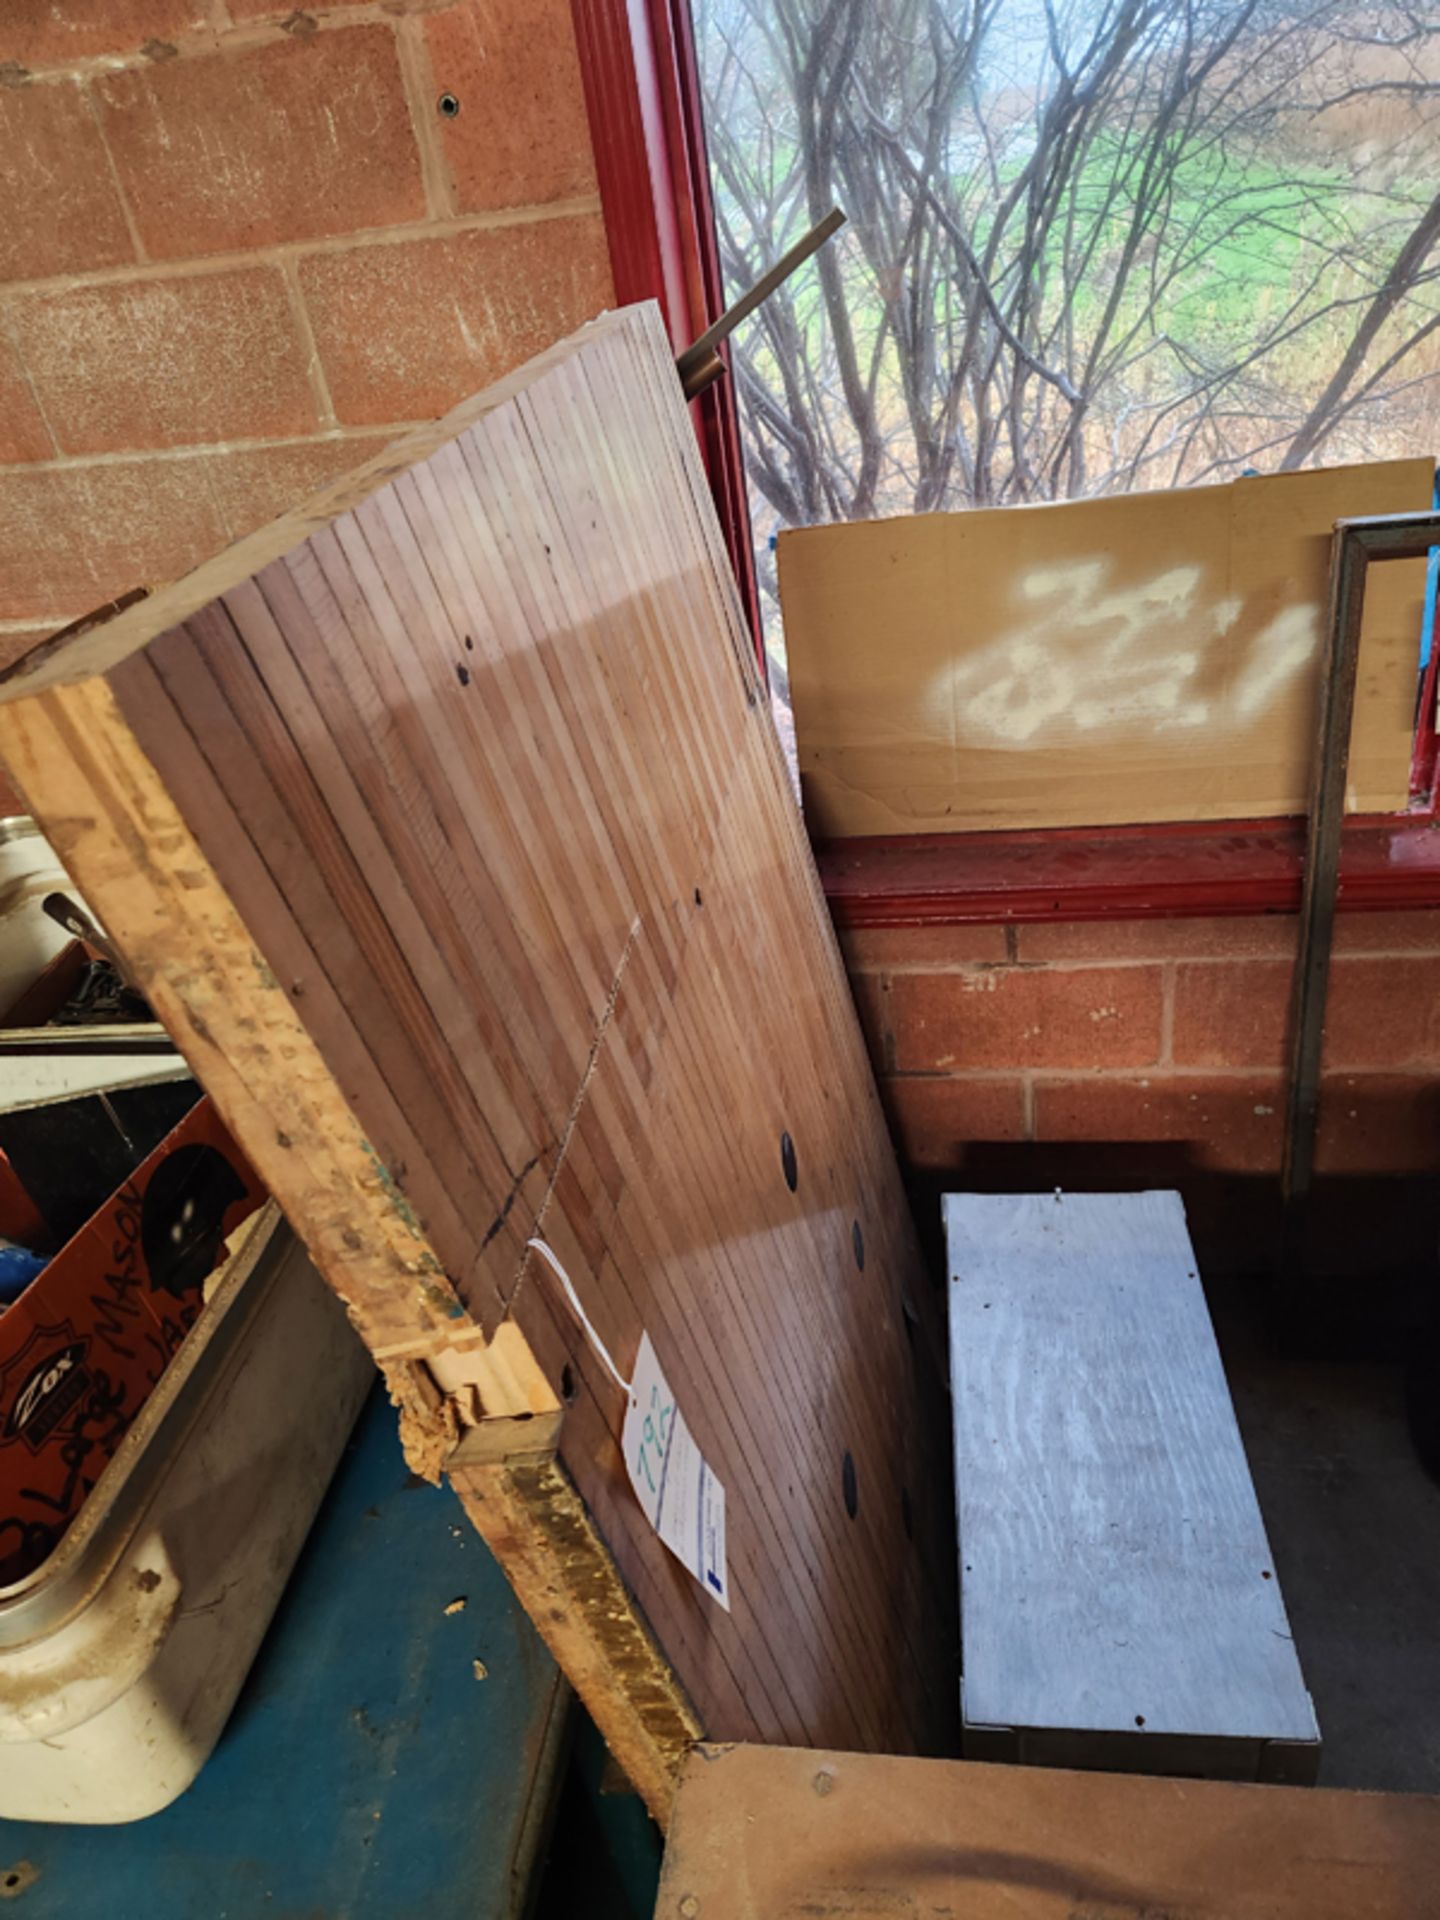 BOWLING LANE AND SHIPPING CRATE - Image 2 of 3